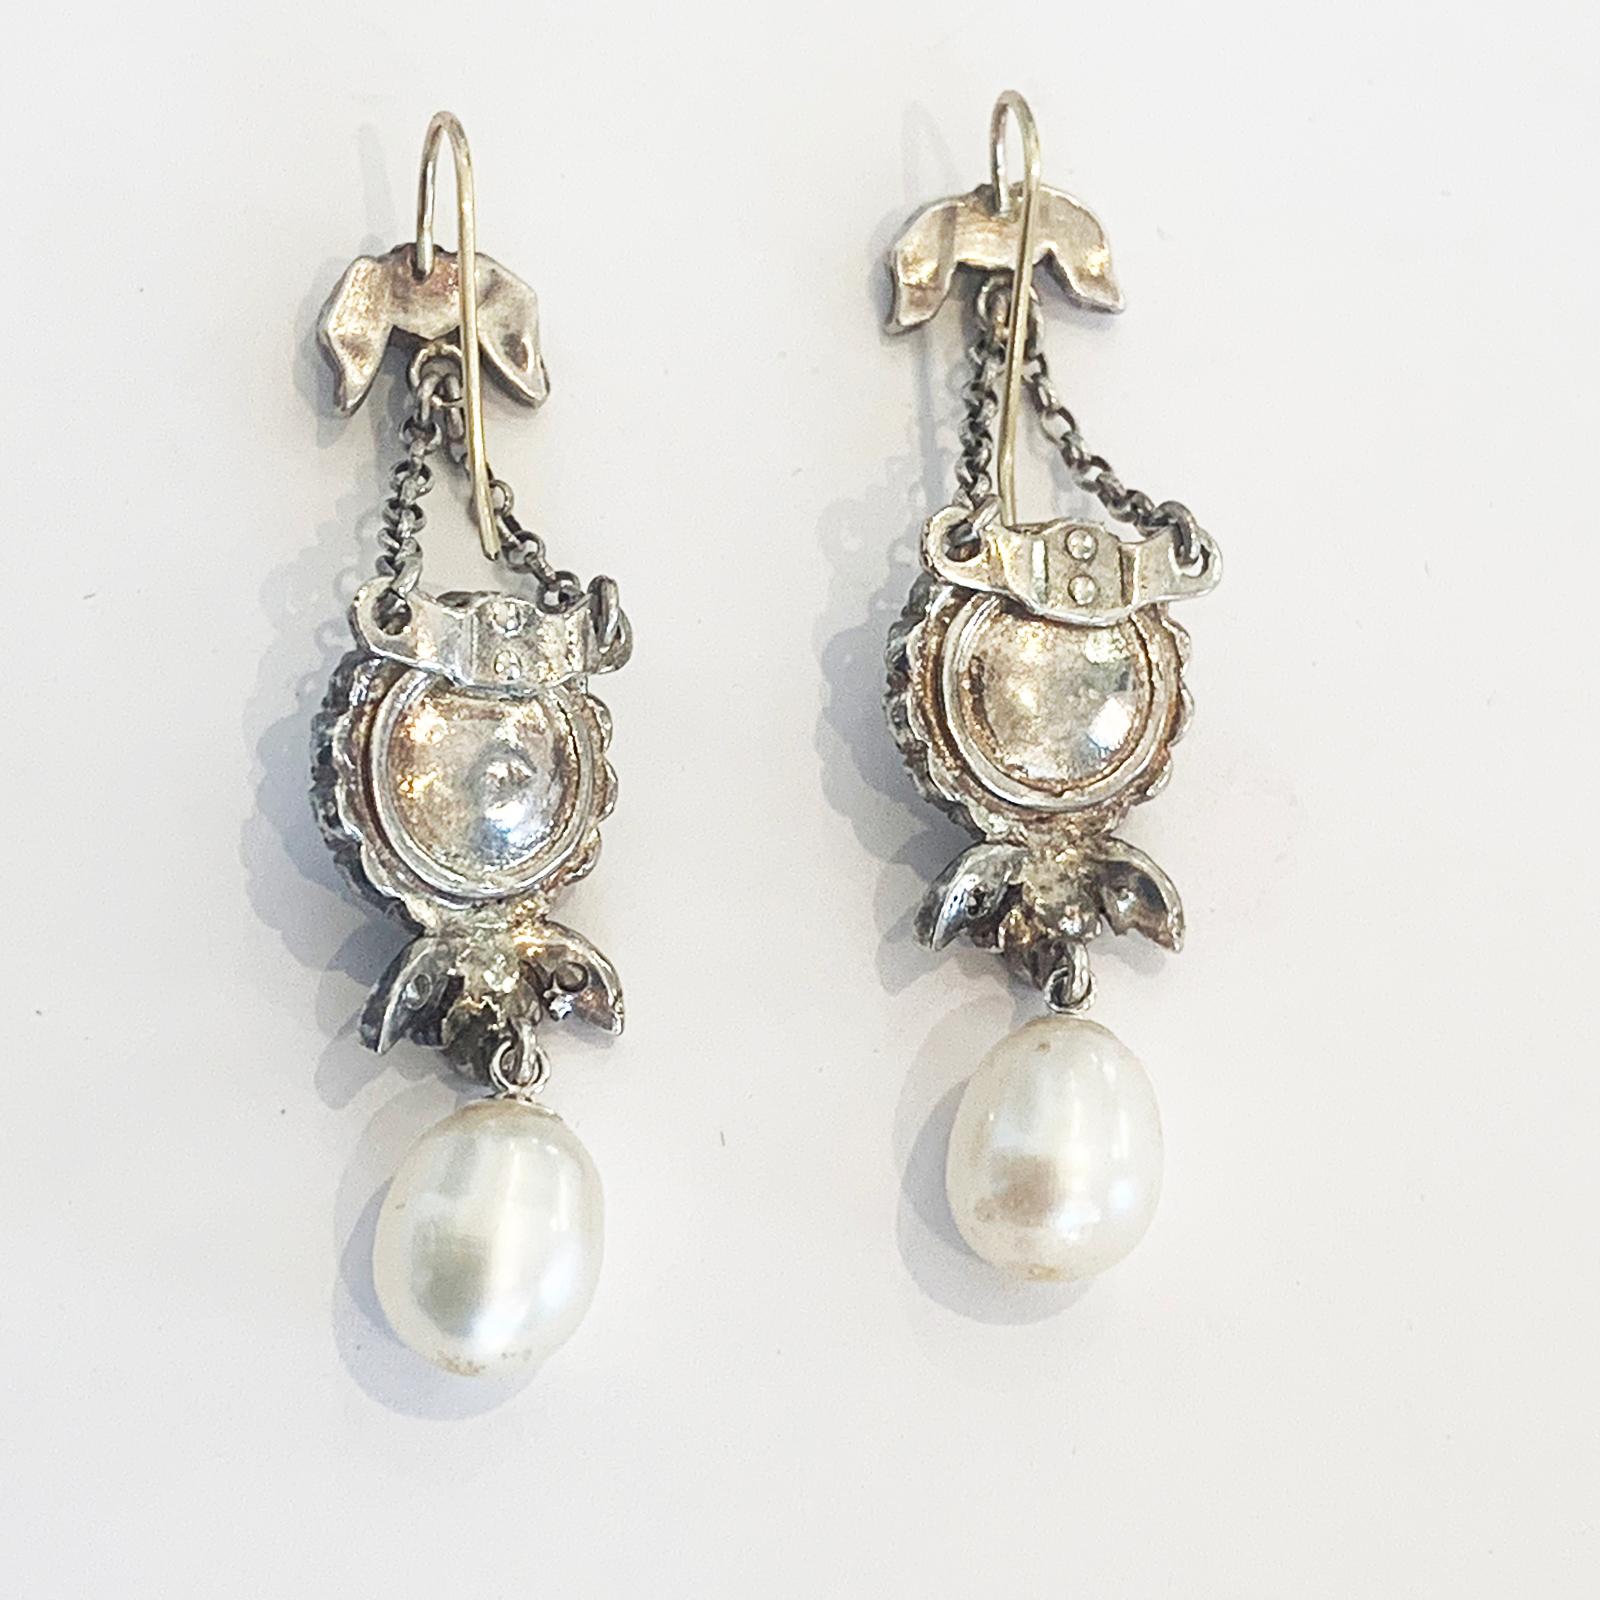 Art Deco Earrings in 9ct gold, silver and Cultured pearls In Good Condition For Sale In Daylesford, Victoria